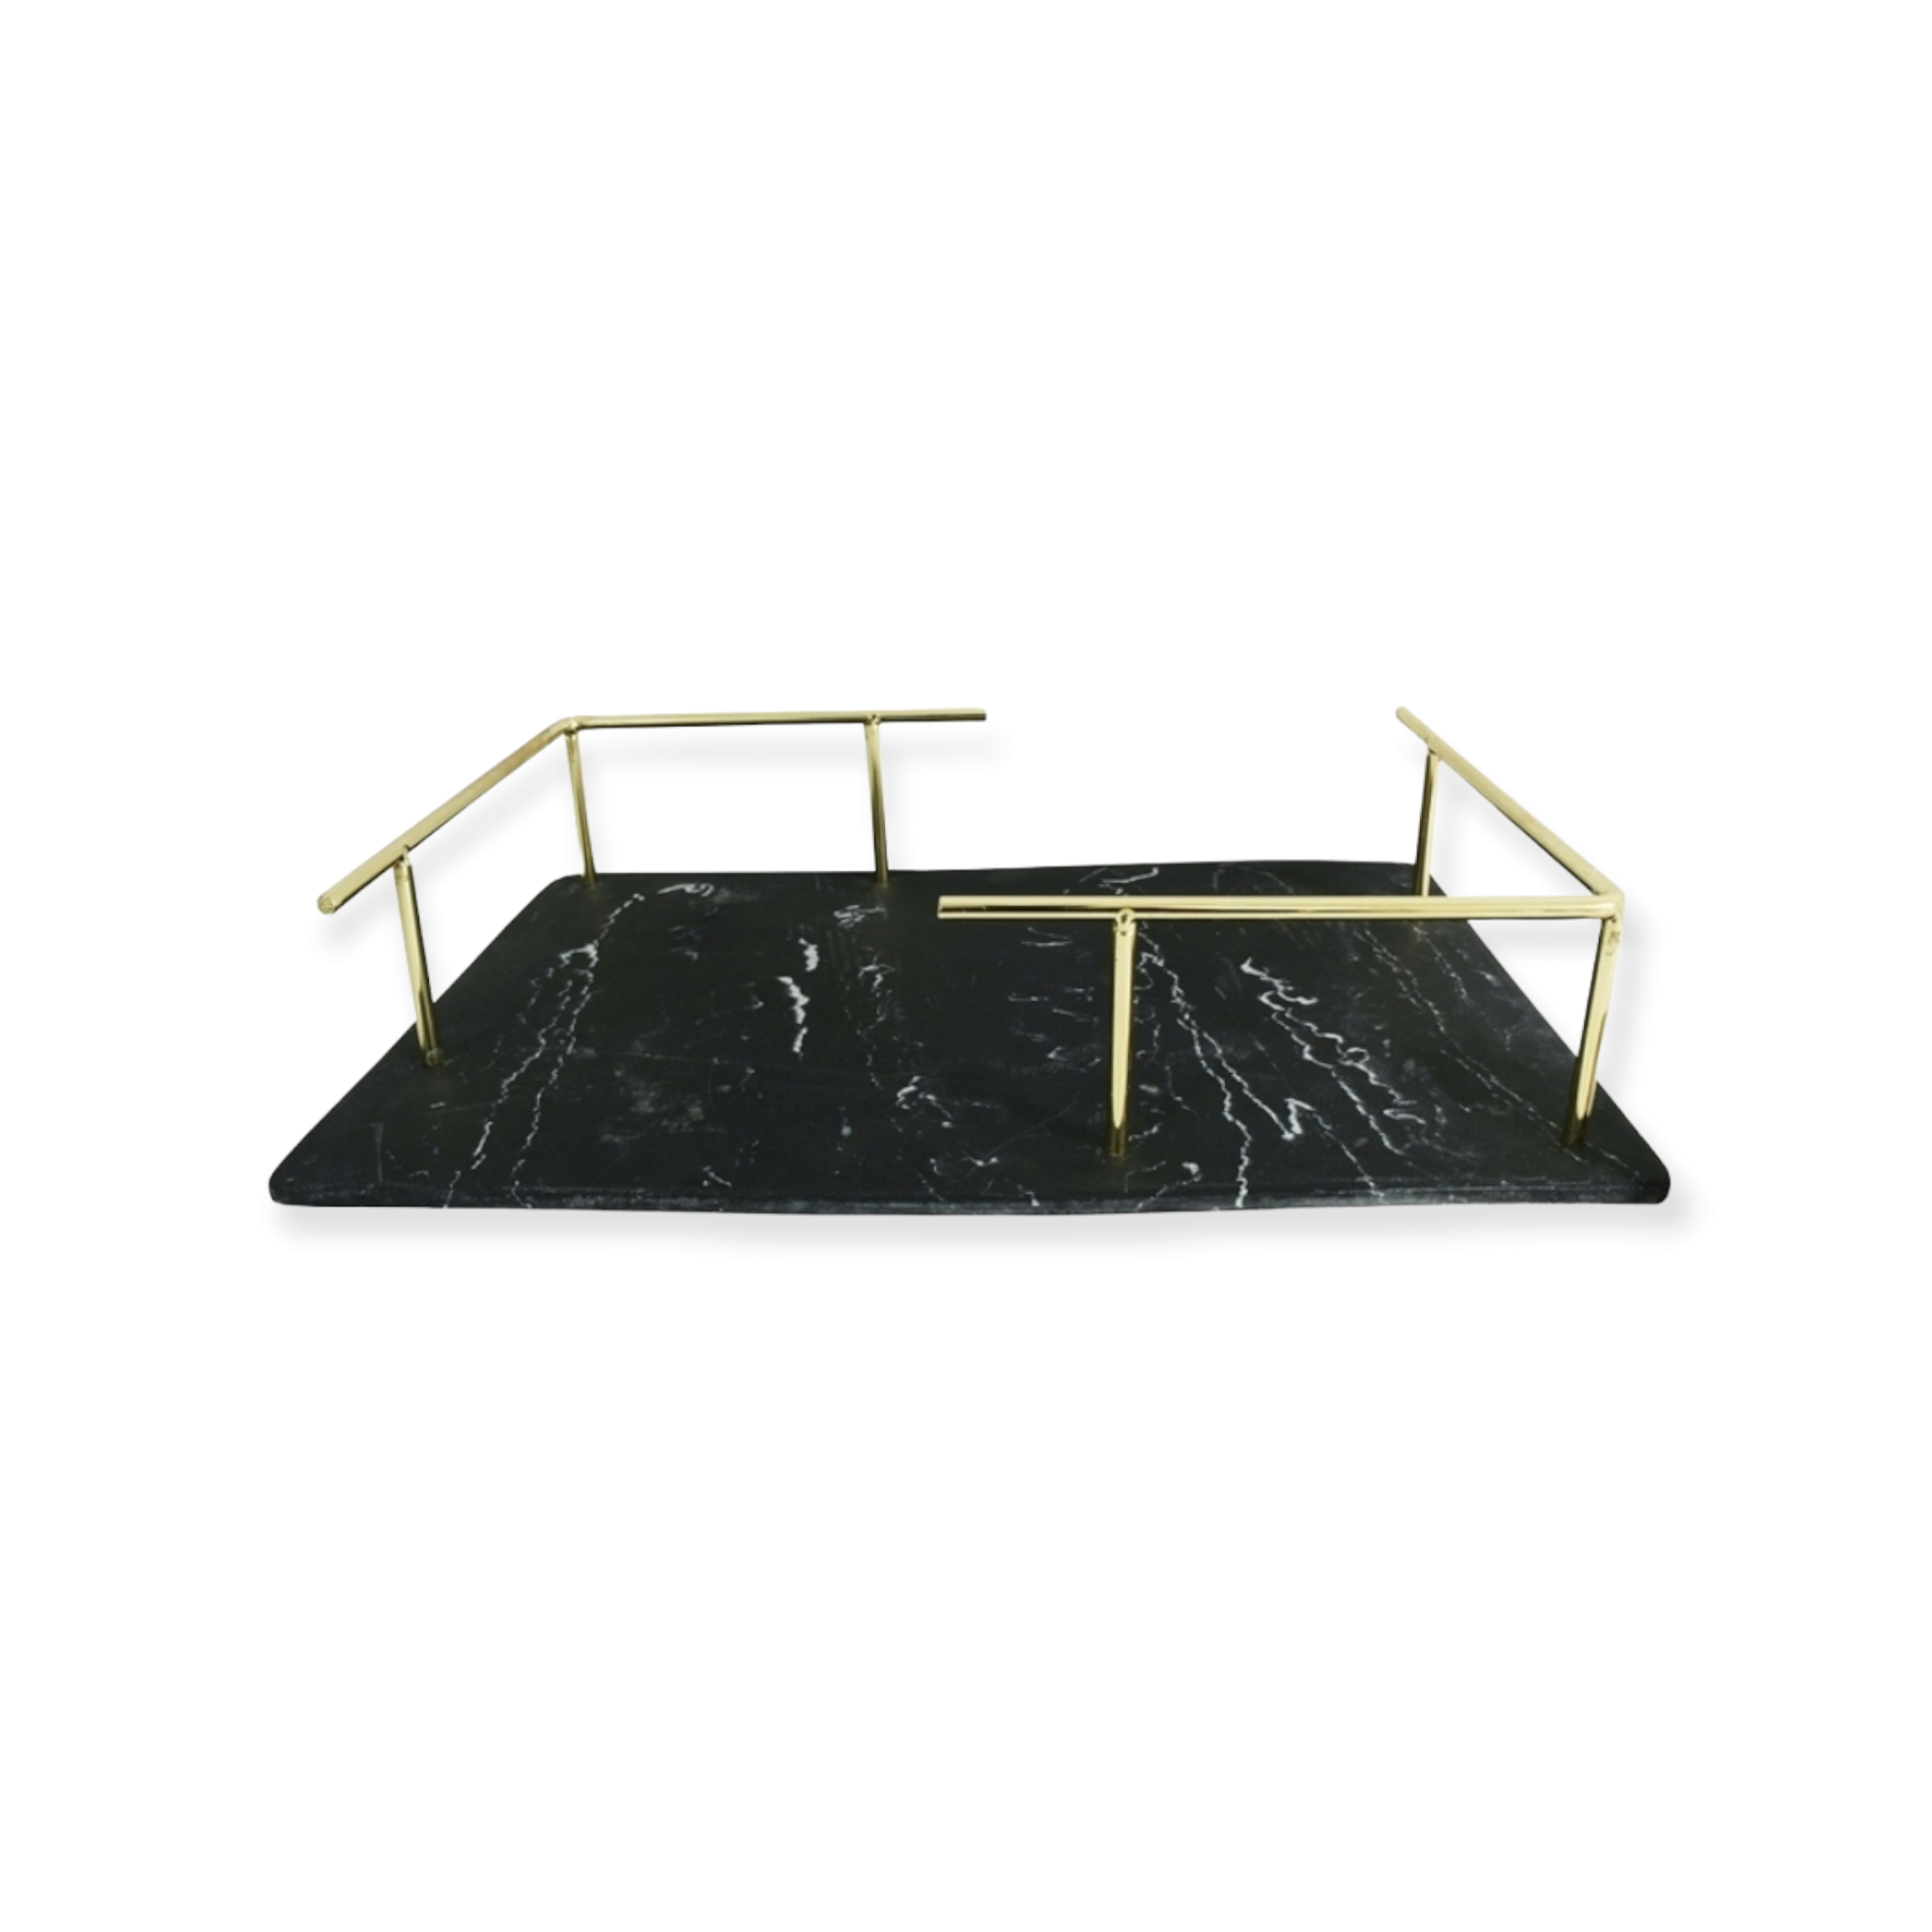 Resin Tray 1 Tier Black Gold Plate Handle Rectangle 10727